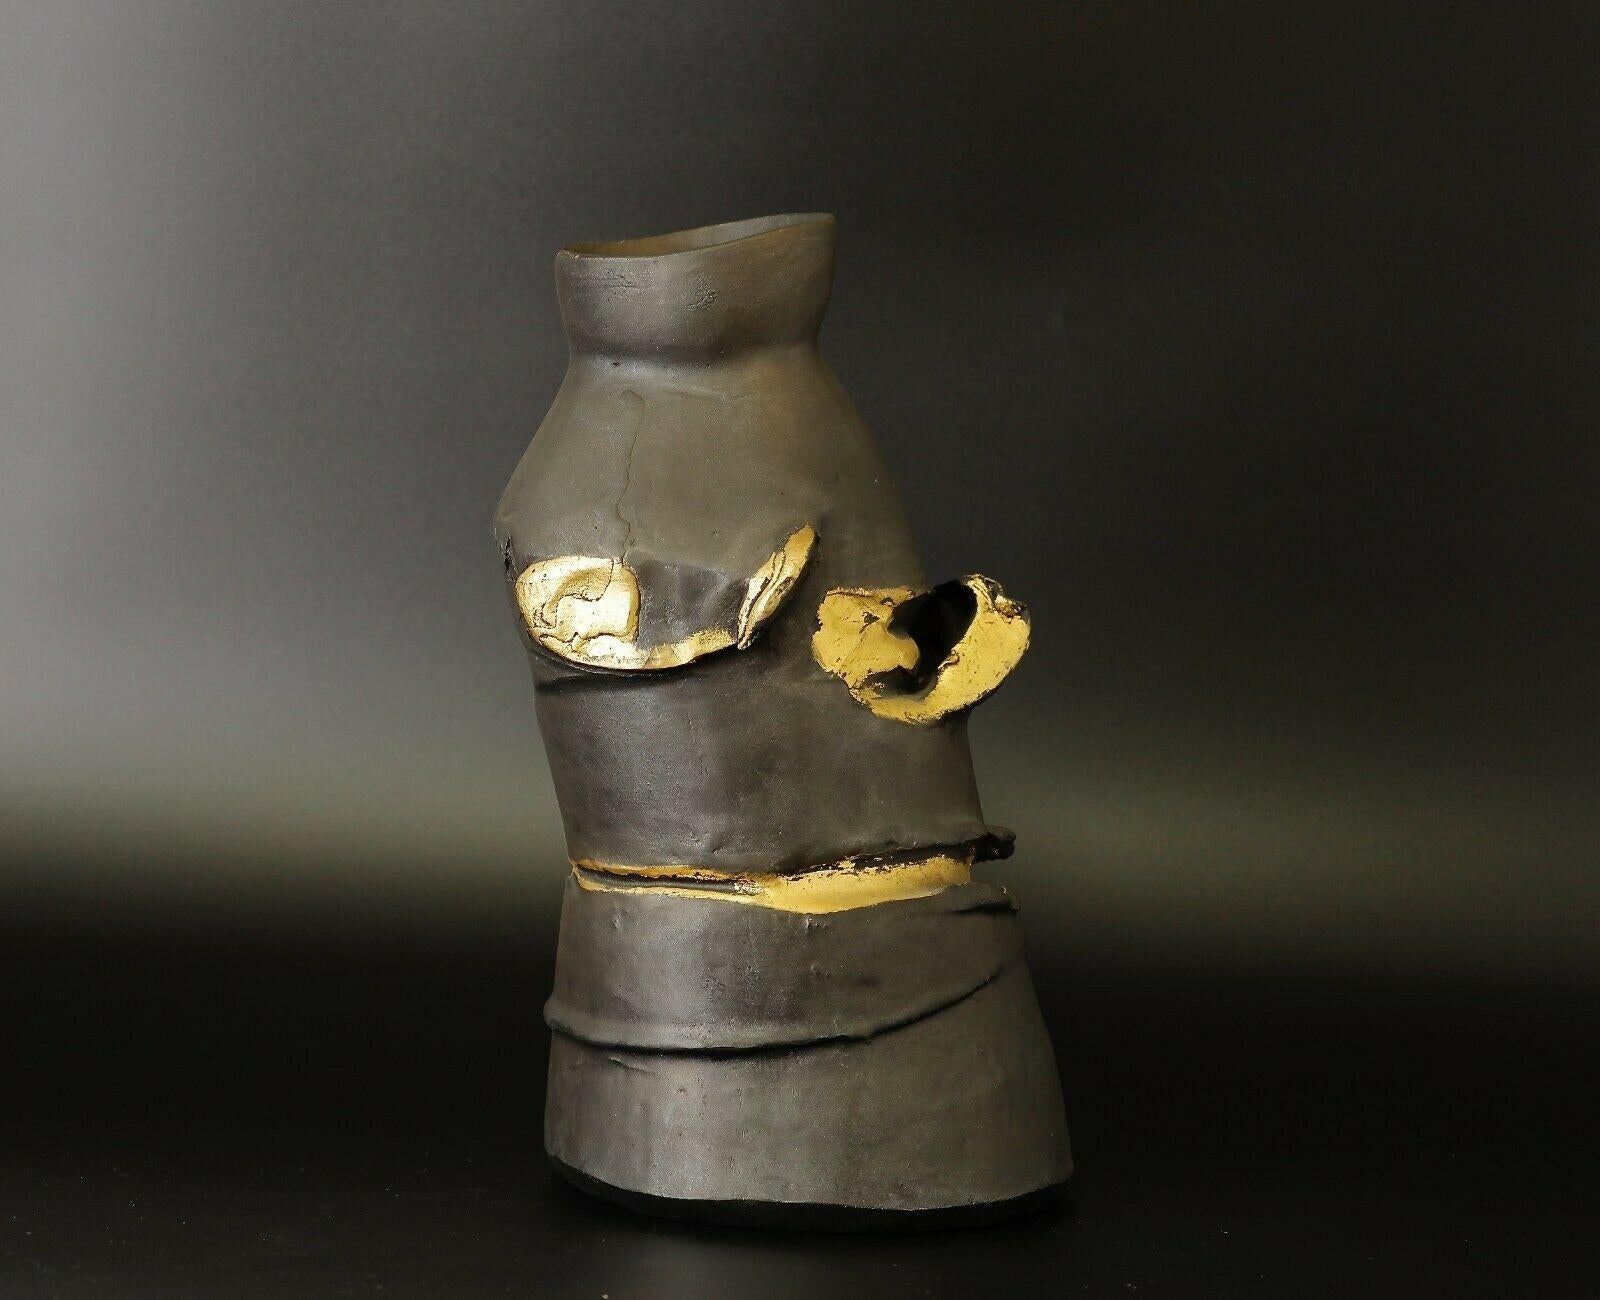 Rare and spectacular Masuo Ikeda bronze vessel / vase with gold details. 
It is a limited edition, 28/30 and it is signed. Comes with its original wooden box (tomobako).

 Ikeda Masuo ( 池田 満寿夫 ) was a pluridisciplinary artist : painter, movie-maker,